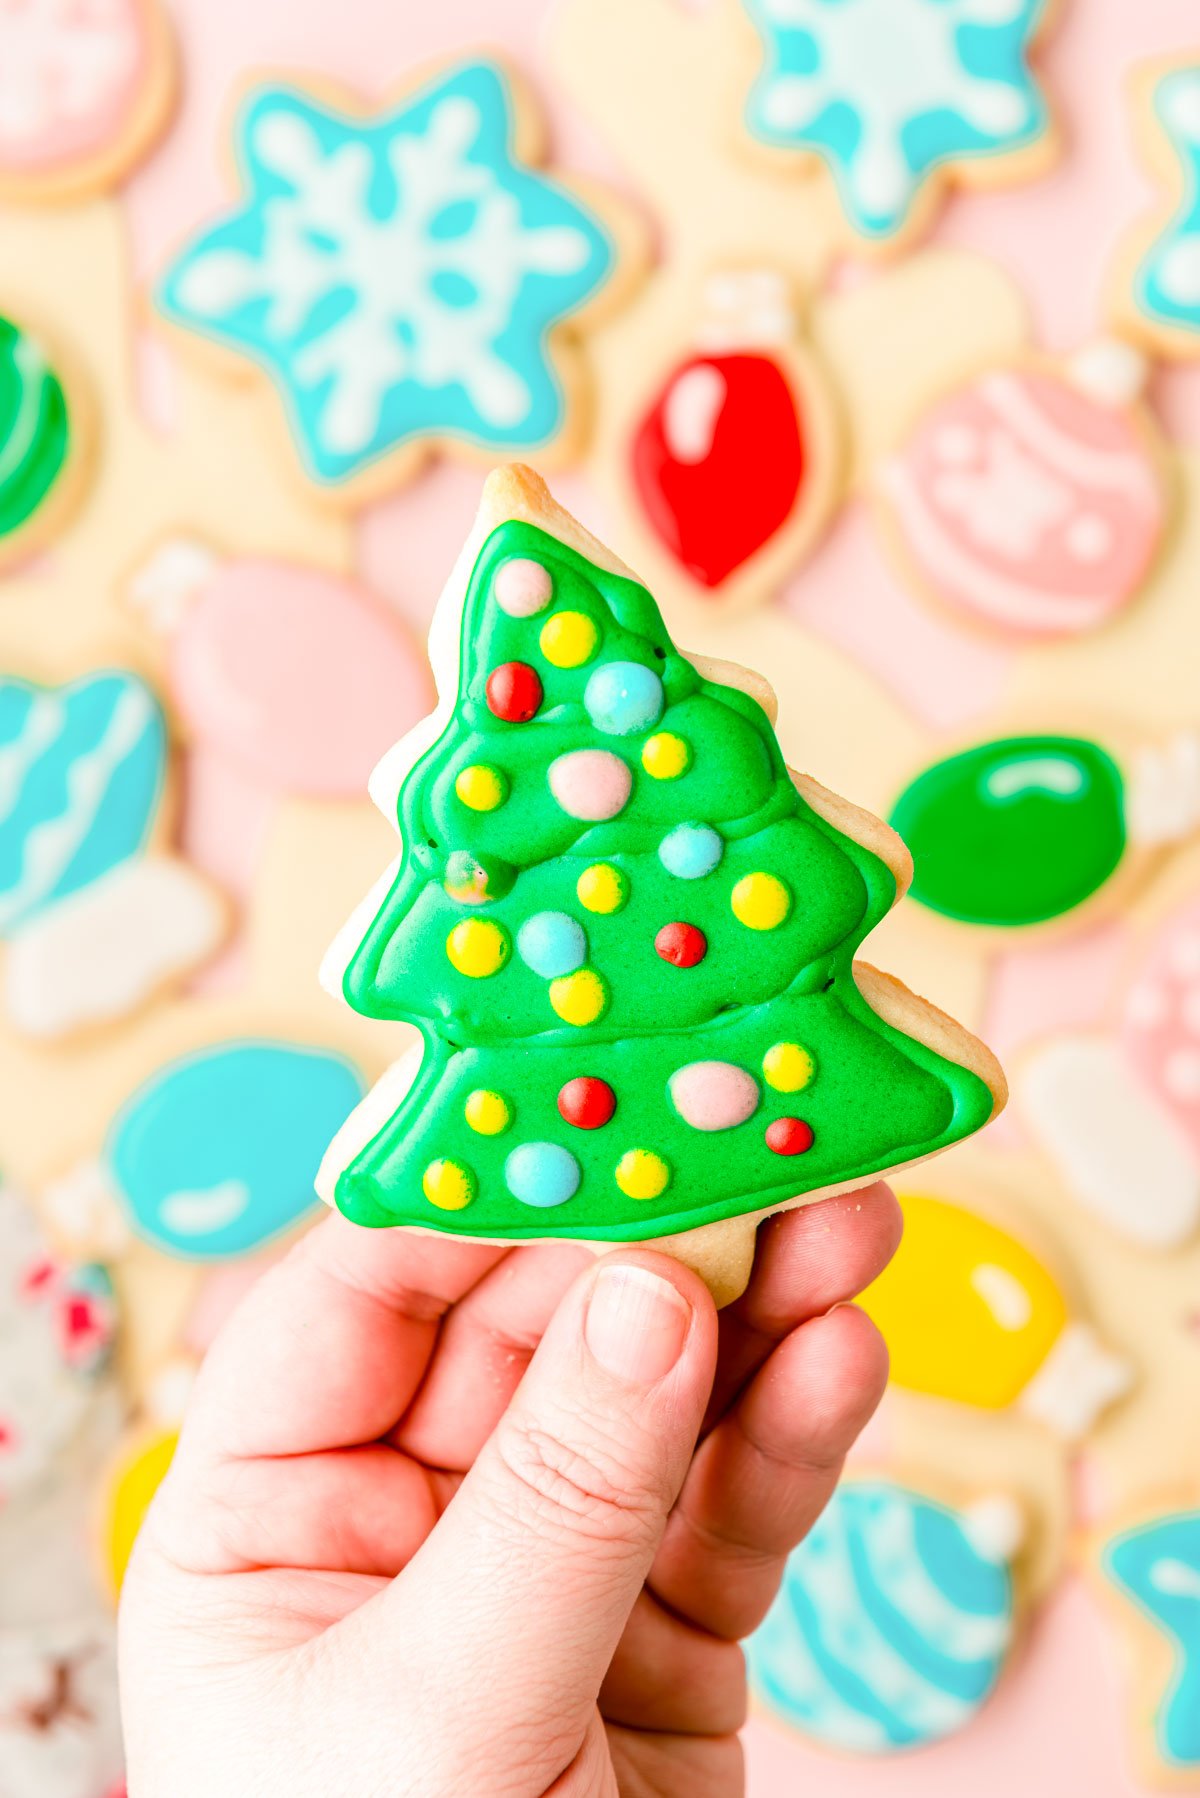 A woman's hand holing an iced Christmas tree cookie to the camera.